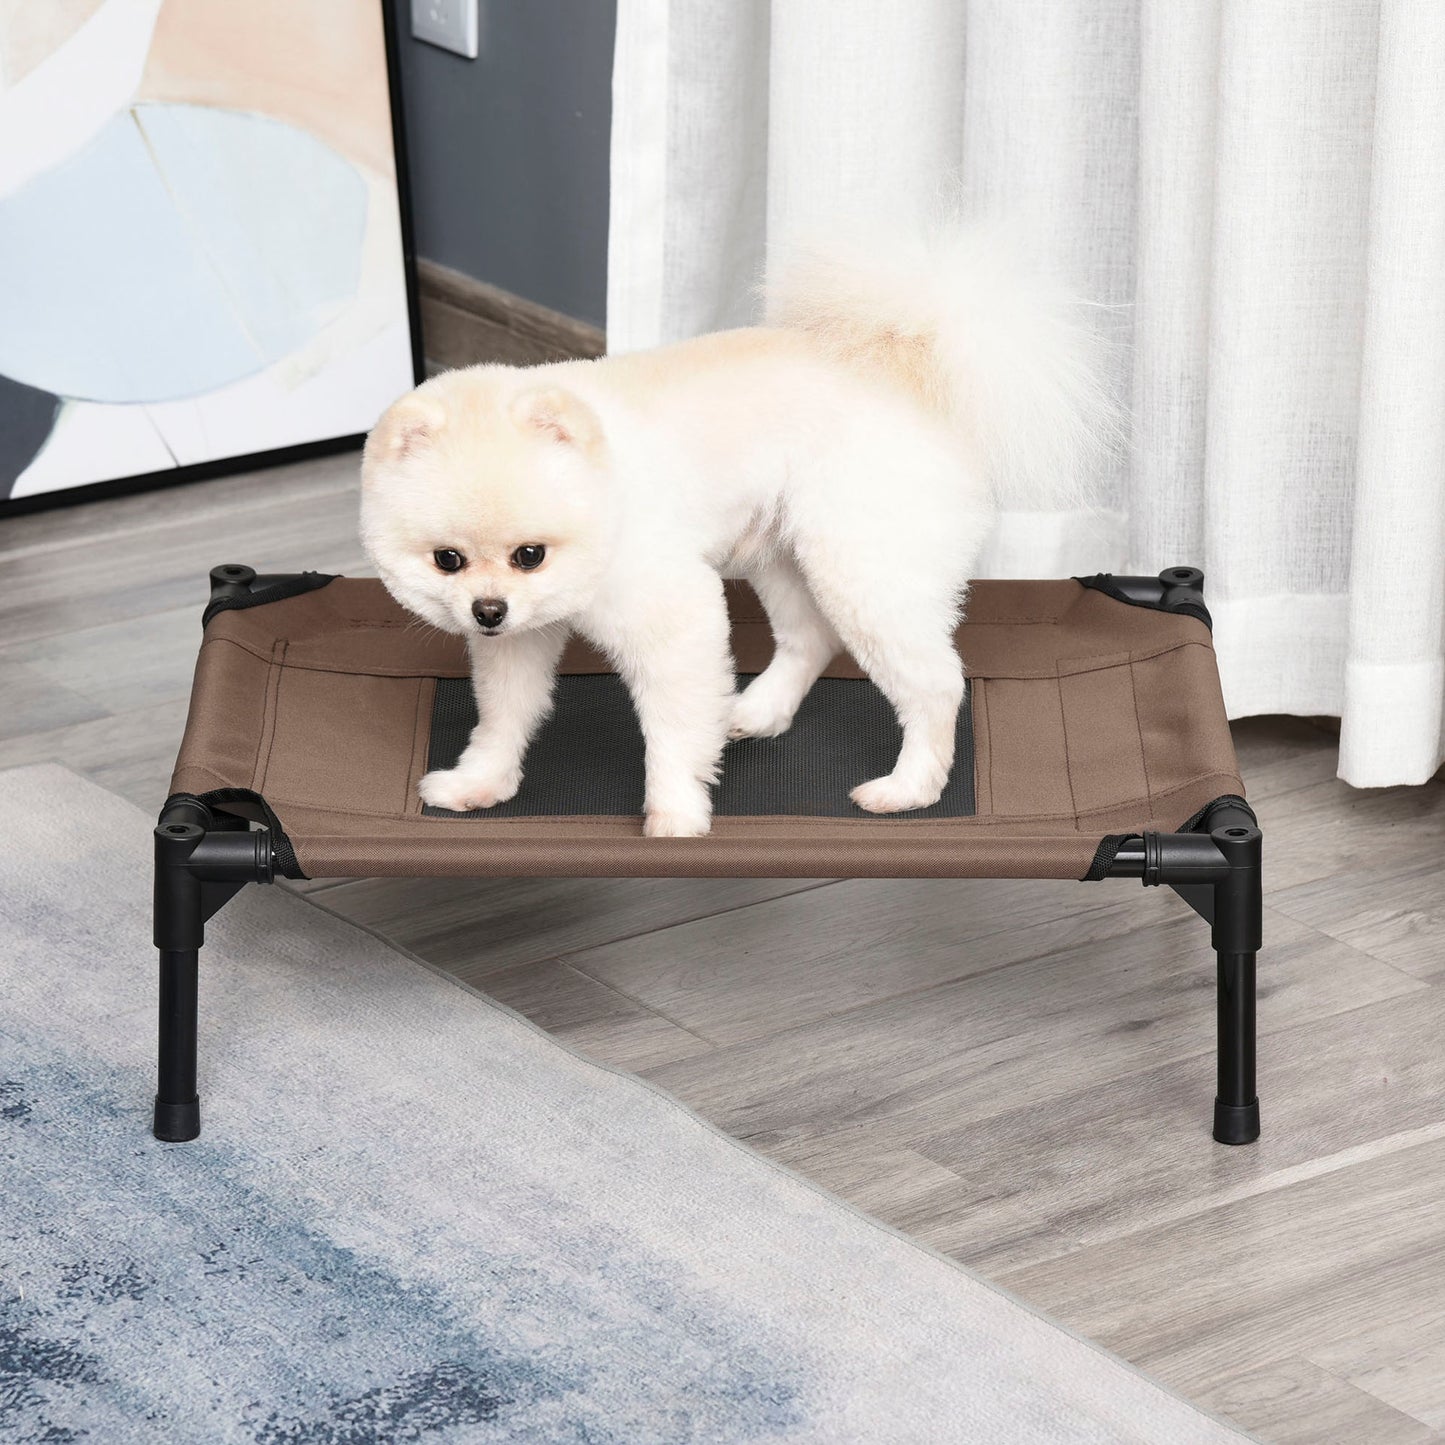 Nancy's Akwesasne Bed with Canopy, Foldable, Dog Lounger, Outdoor Dog Bed